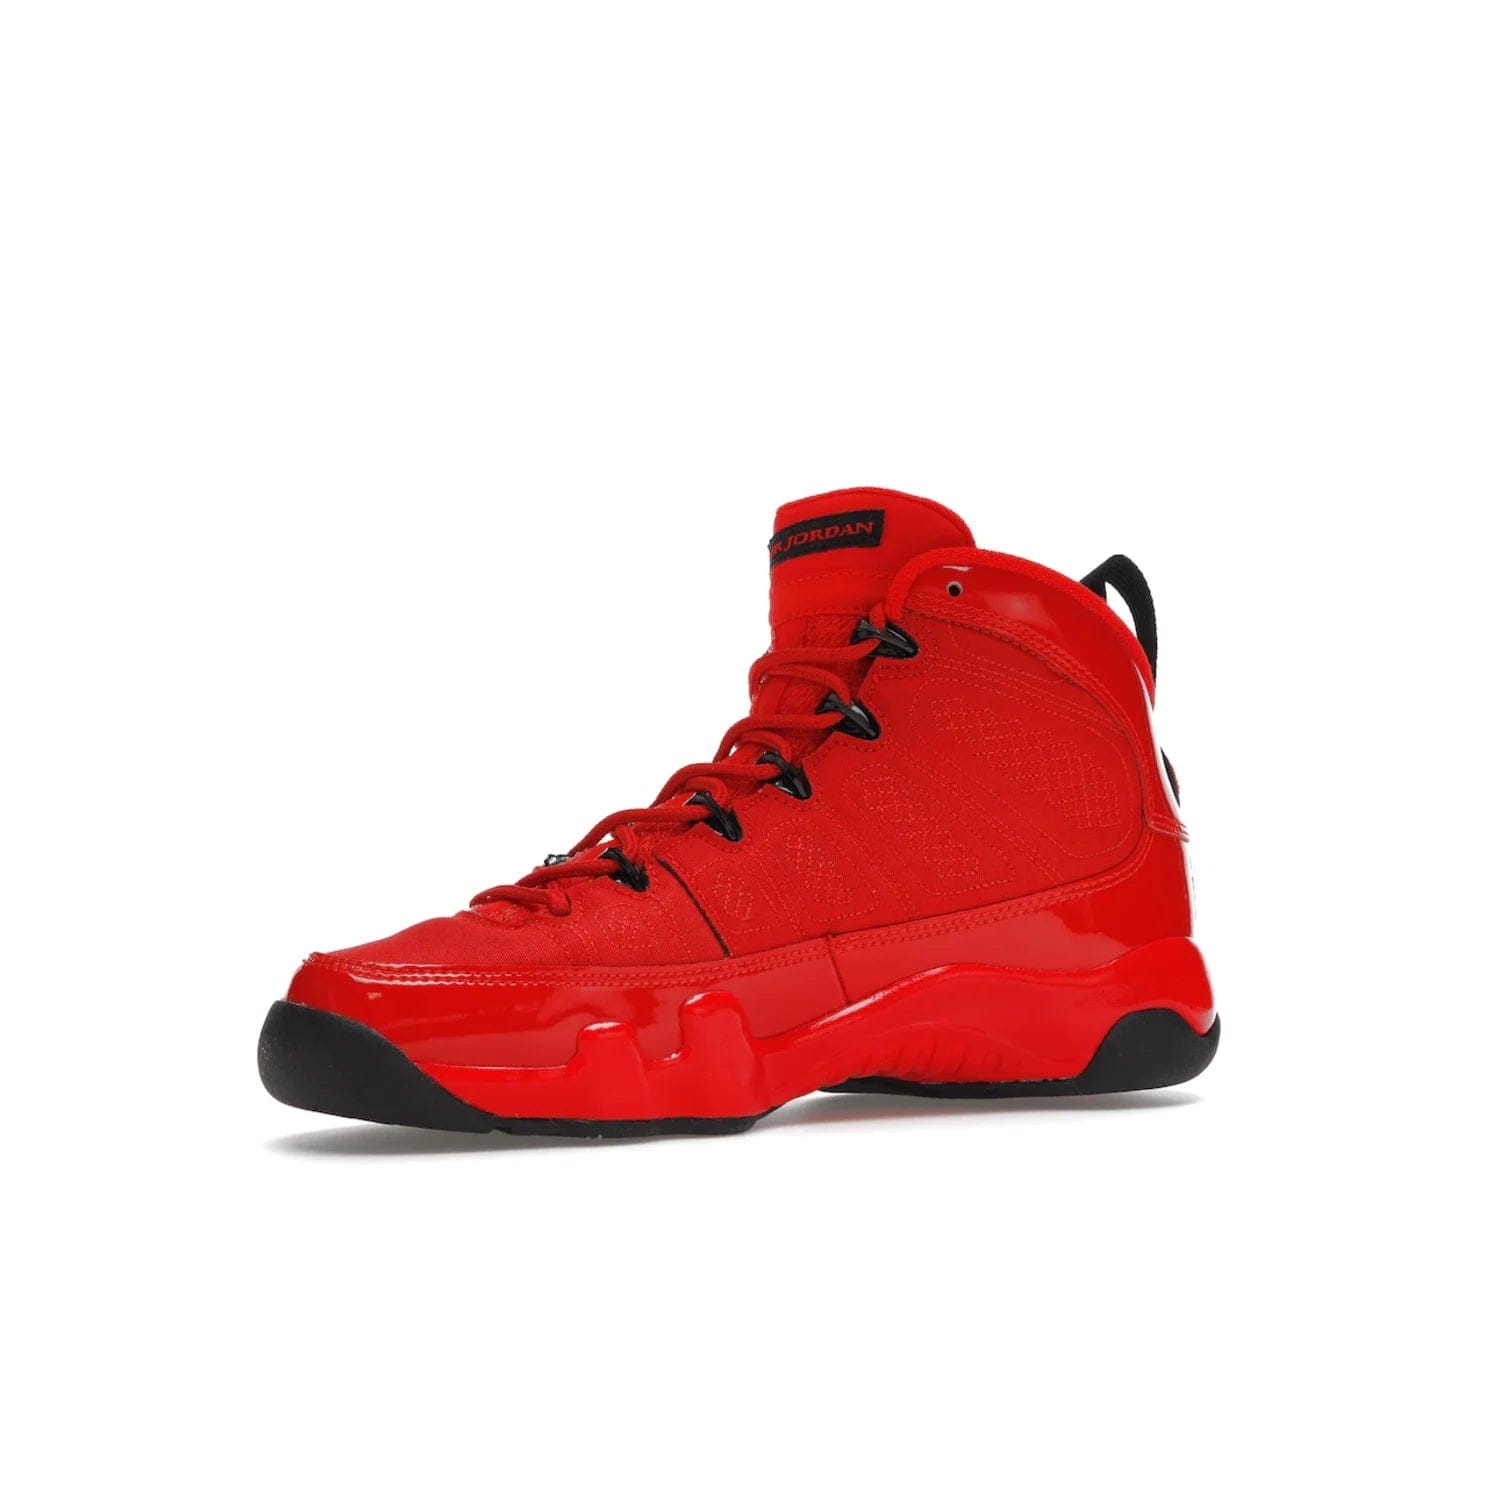 Jordan 9 Retro Chile Red (GS) - Image 16 - Only at www.BallersClubKickz.com - Introducing the Air Jordan 9 Retro Chile Red (GS), a vintage 1993 silhouette with fiery colorway. Features quilted side paneling, glossy patent leather, pull tabs, black contrast accents, and foam midsole. Launching May 2022 for $140.